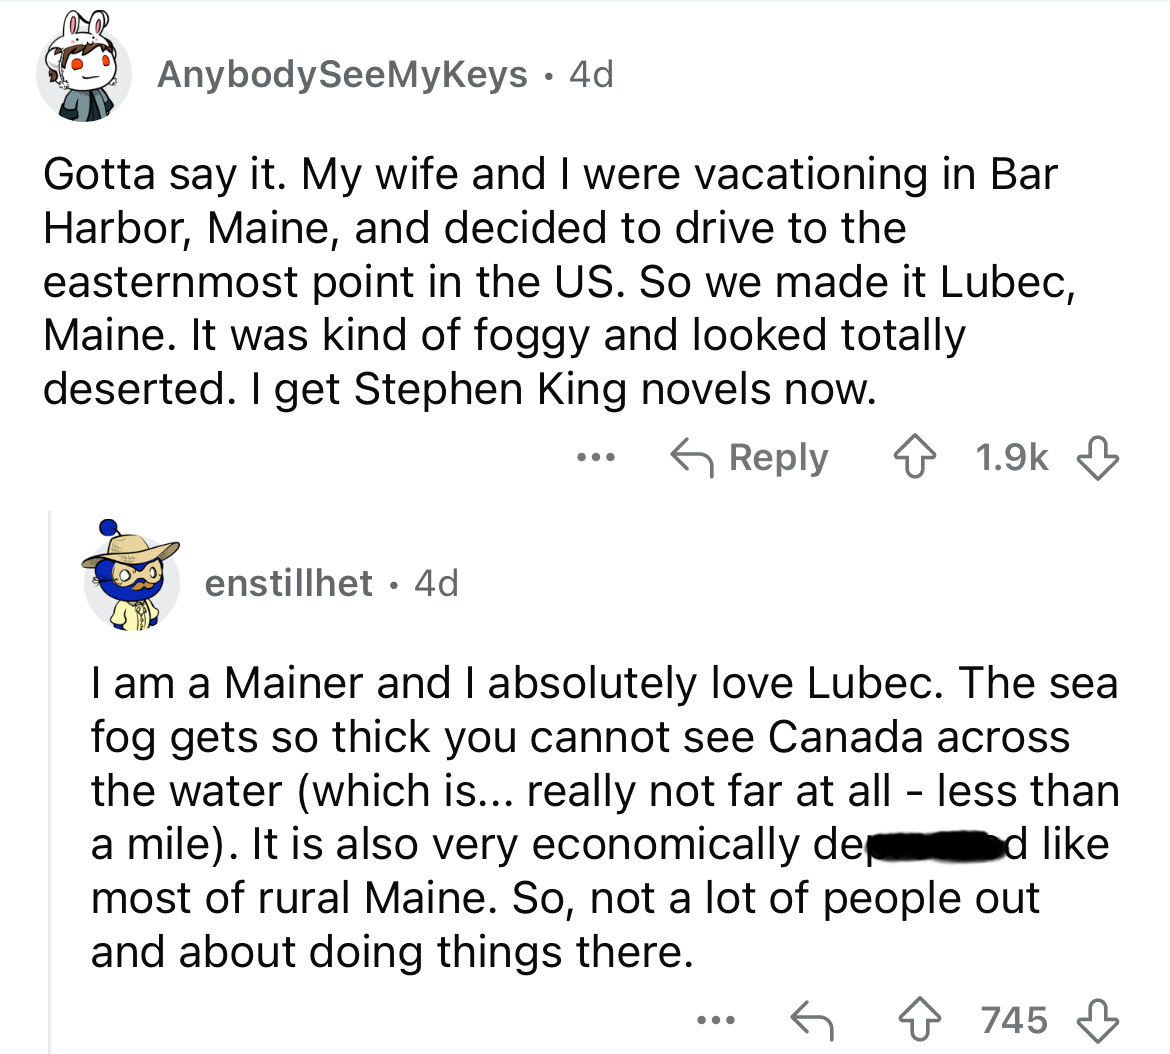 screenshot - Anybody SeeMyKeys 4d . Gotta say it. My wife and I were vacationing in Bar Harbor, Maine, and decided to drive to the easternmost point in the Us. So we made it Lubec, Maine. It was kind of foggy and looked totally deserted. I get Stephen Kin